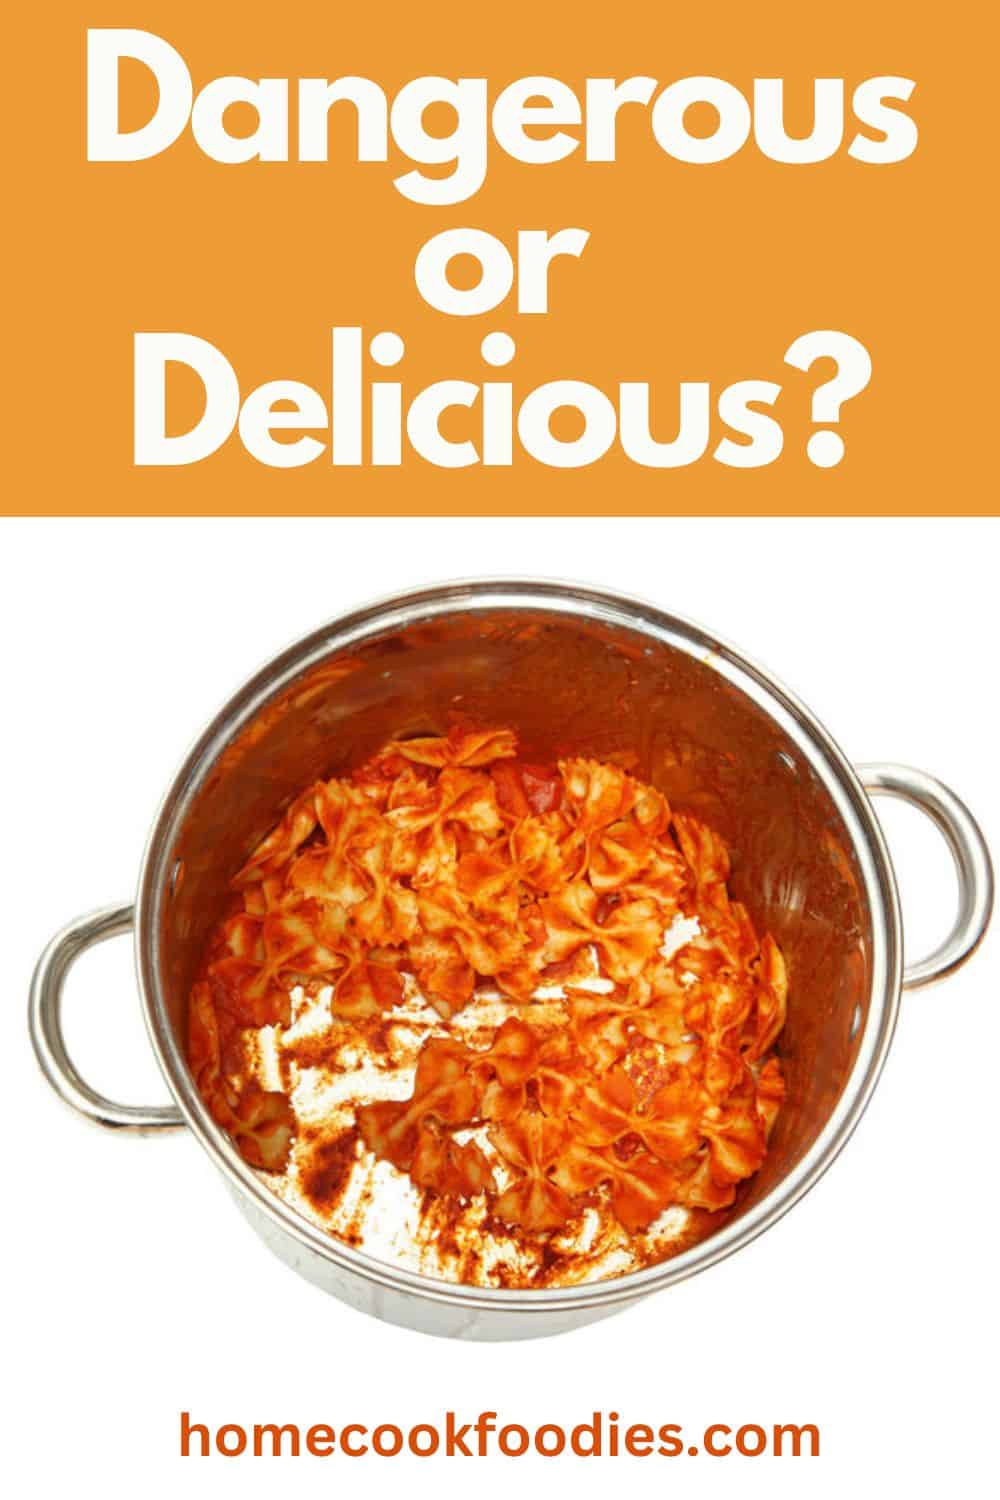 A pot containing pasta left out overnight with text overlay of "Dangerous or Delicious?"